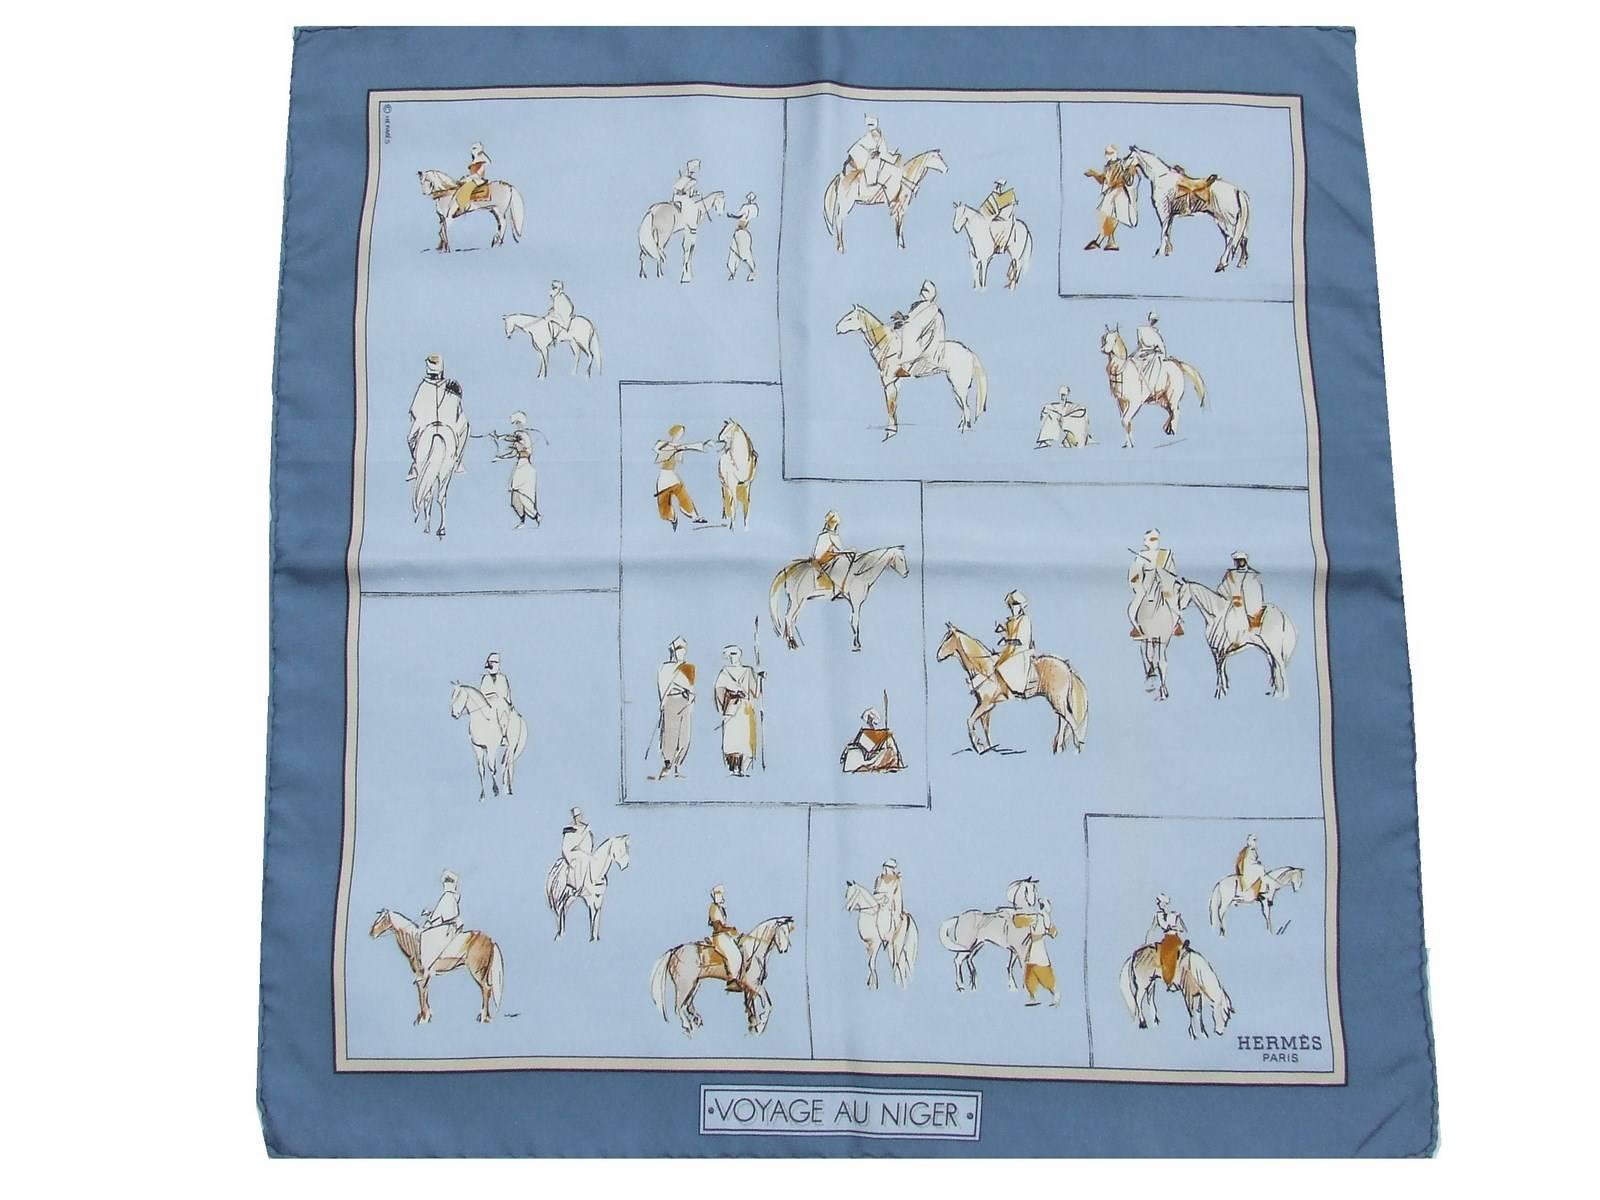 BEAUTIFUL AND RARER AUTHENTIC HERMES SCARF

Patter: Voyage Au Niger (Travel to Niger)

Made in France

Designed by Karen Petrossian in 1997

Made of 100% Silk

Colorways: Light Blue Background, Blue Border, White, Camel and Black